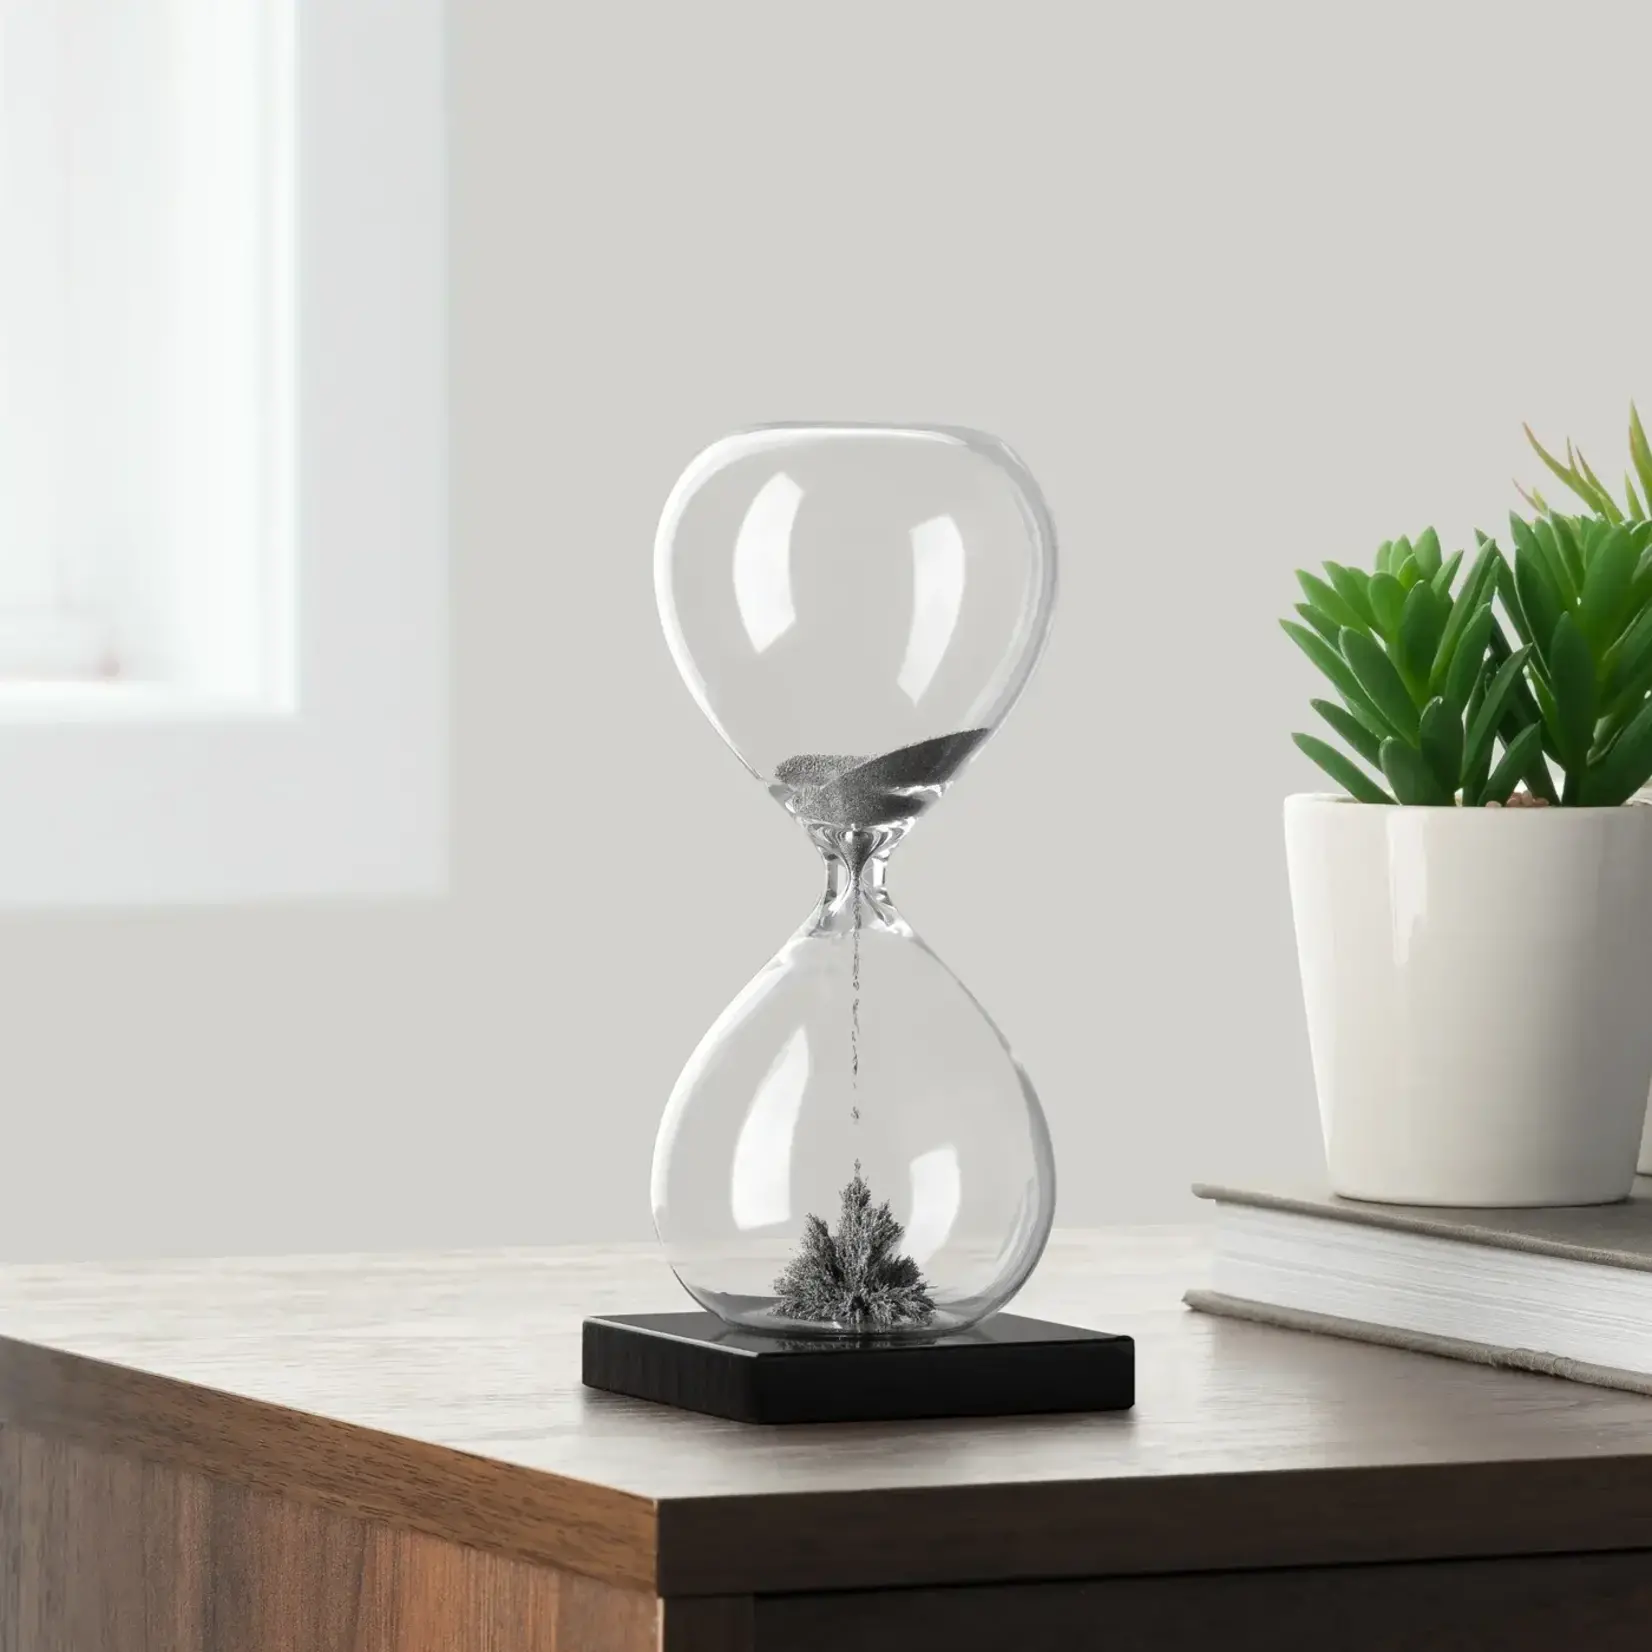 Torre & Tagus Magnetic Sand Hourglass - 6.5"